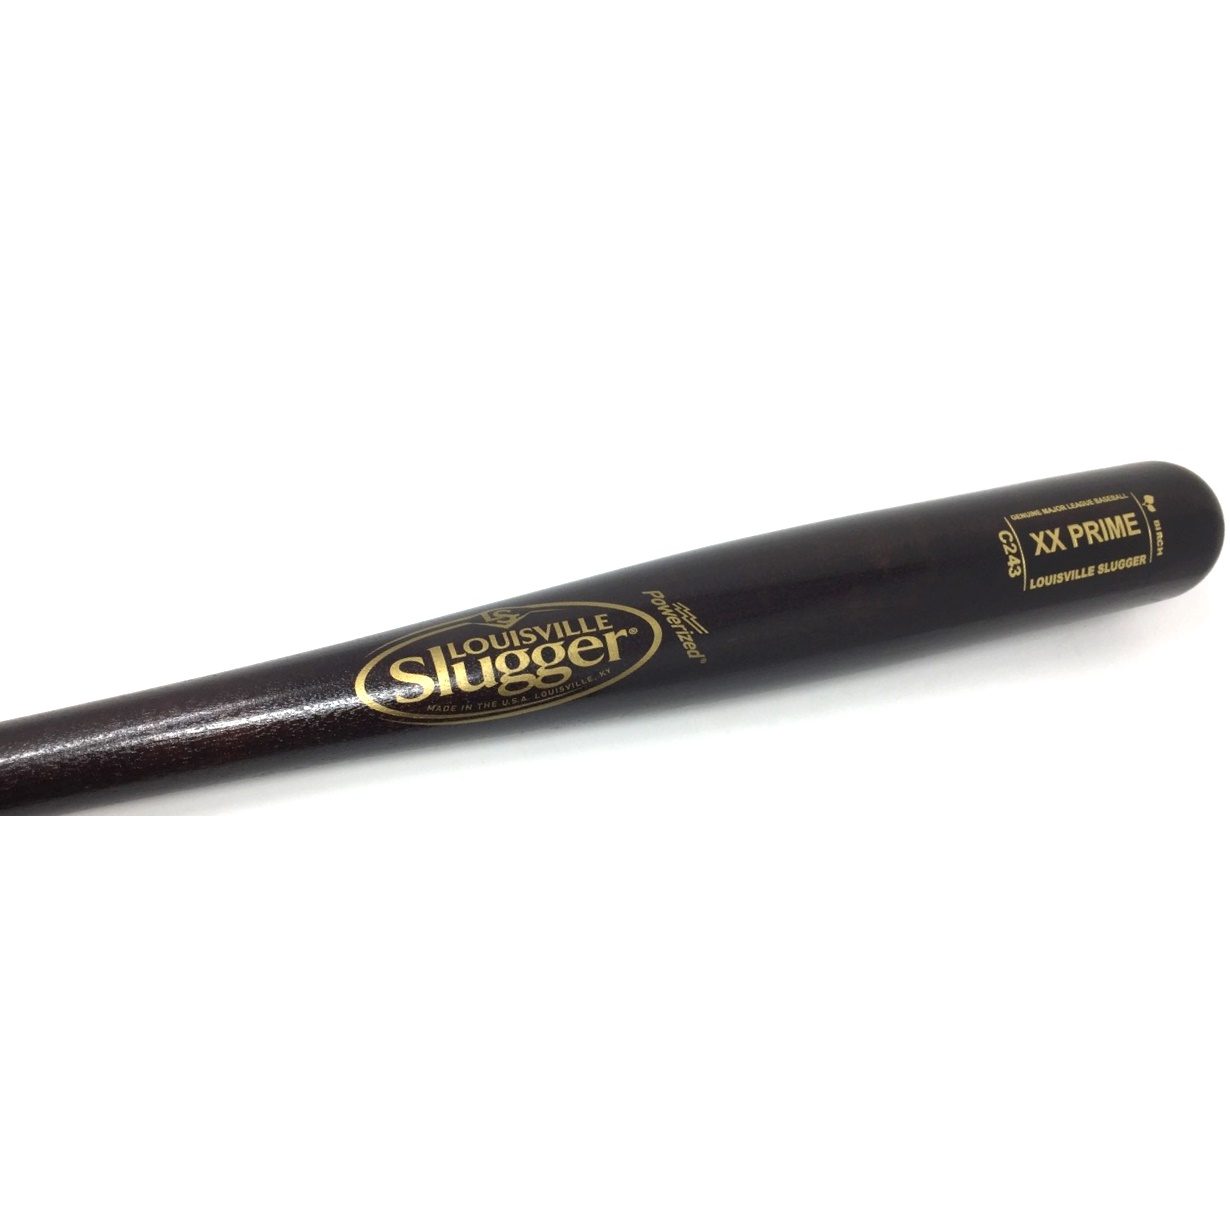 louisville-slugger-xx-prime-birch-c243-wood-baseball-bat-hickory-33-inch-cupped WBXB14P43HK-33 Louisville Does Not Apply Louisville Slugger XX Prime Birch Wood Bat. Hickory in color. Professional